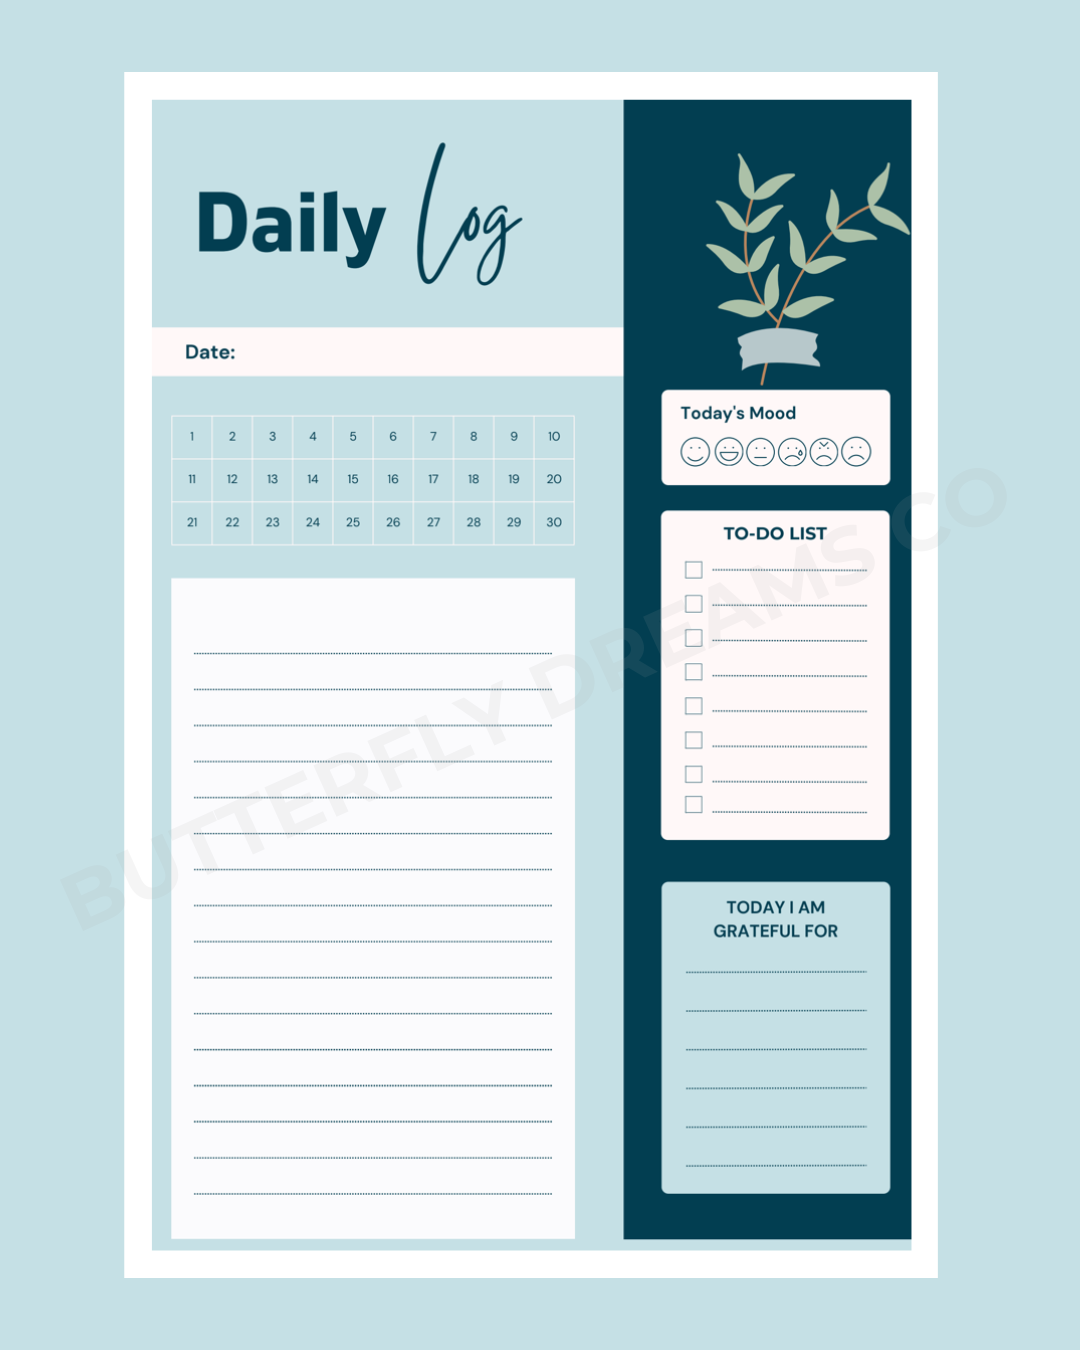 Azure Daily Planner